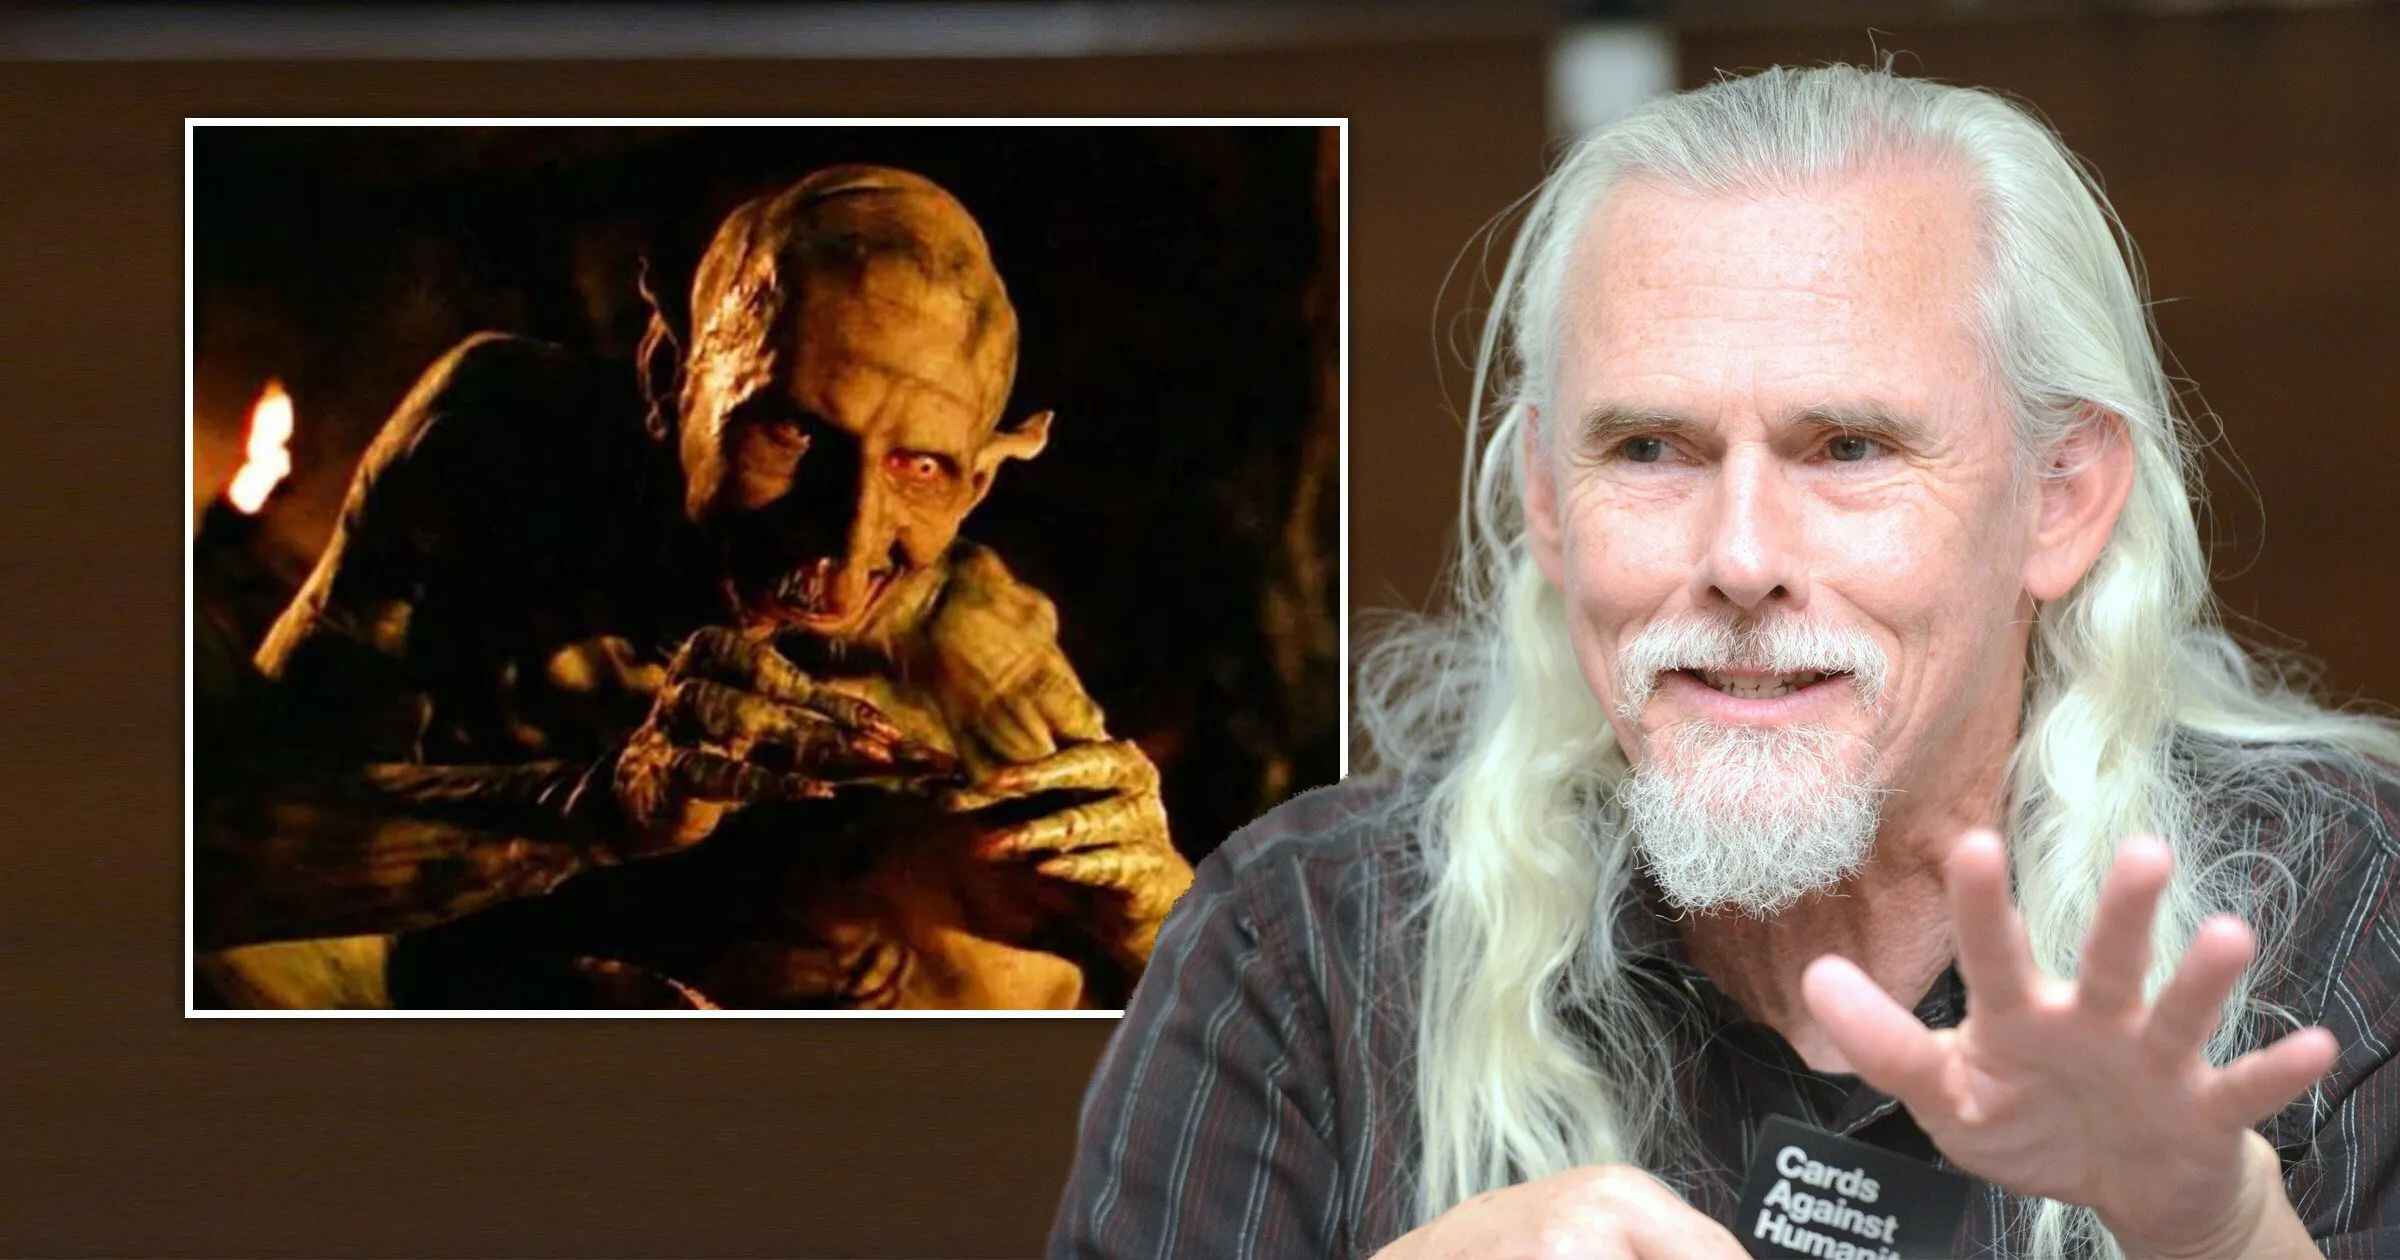 Remembering Camden Toy: A Beloved Actor From “Buffy The Vampire Slayer”